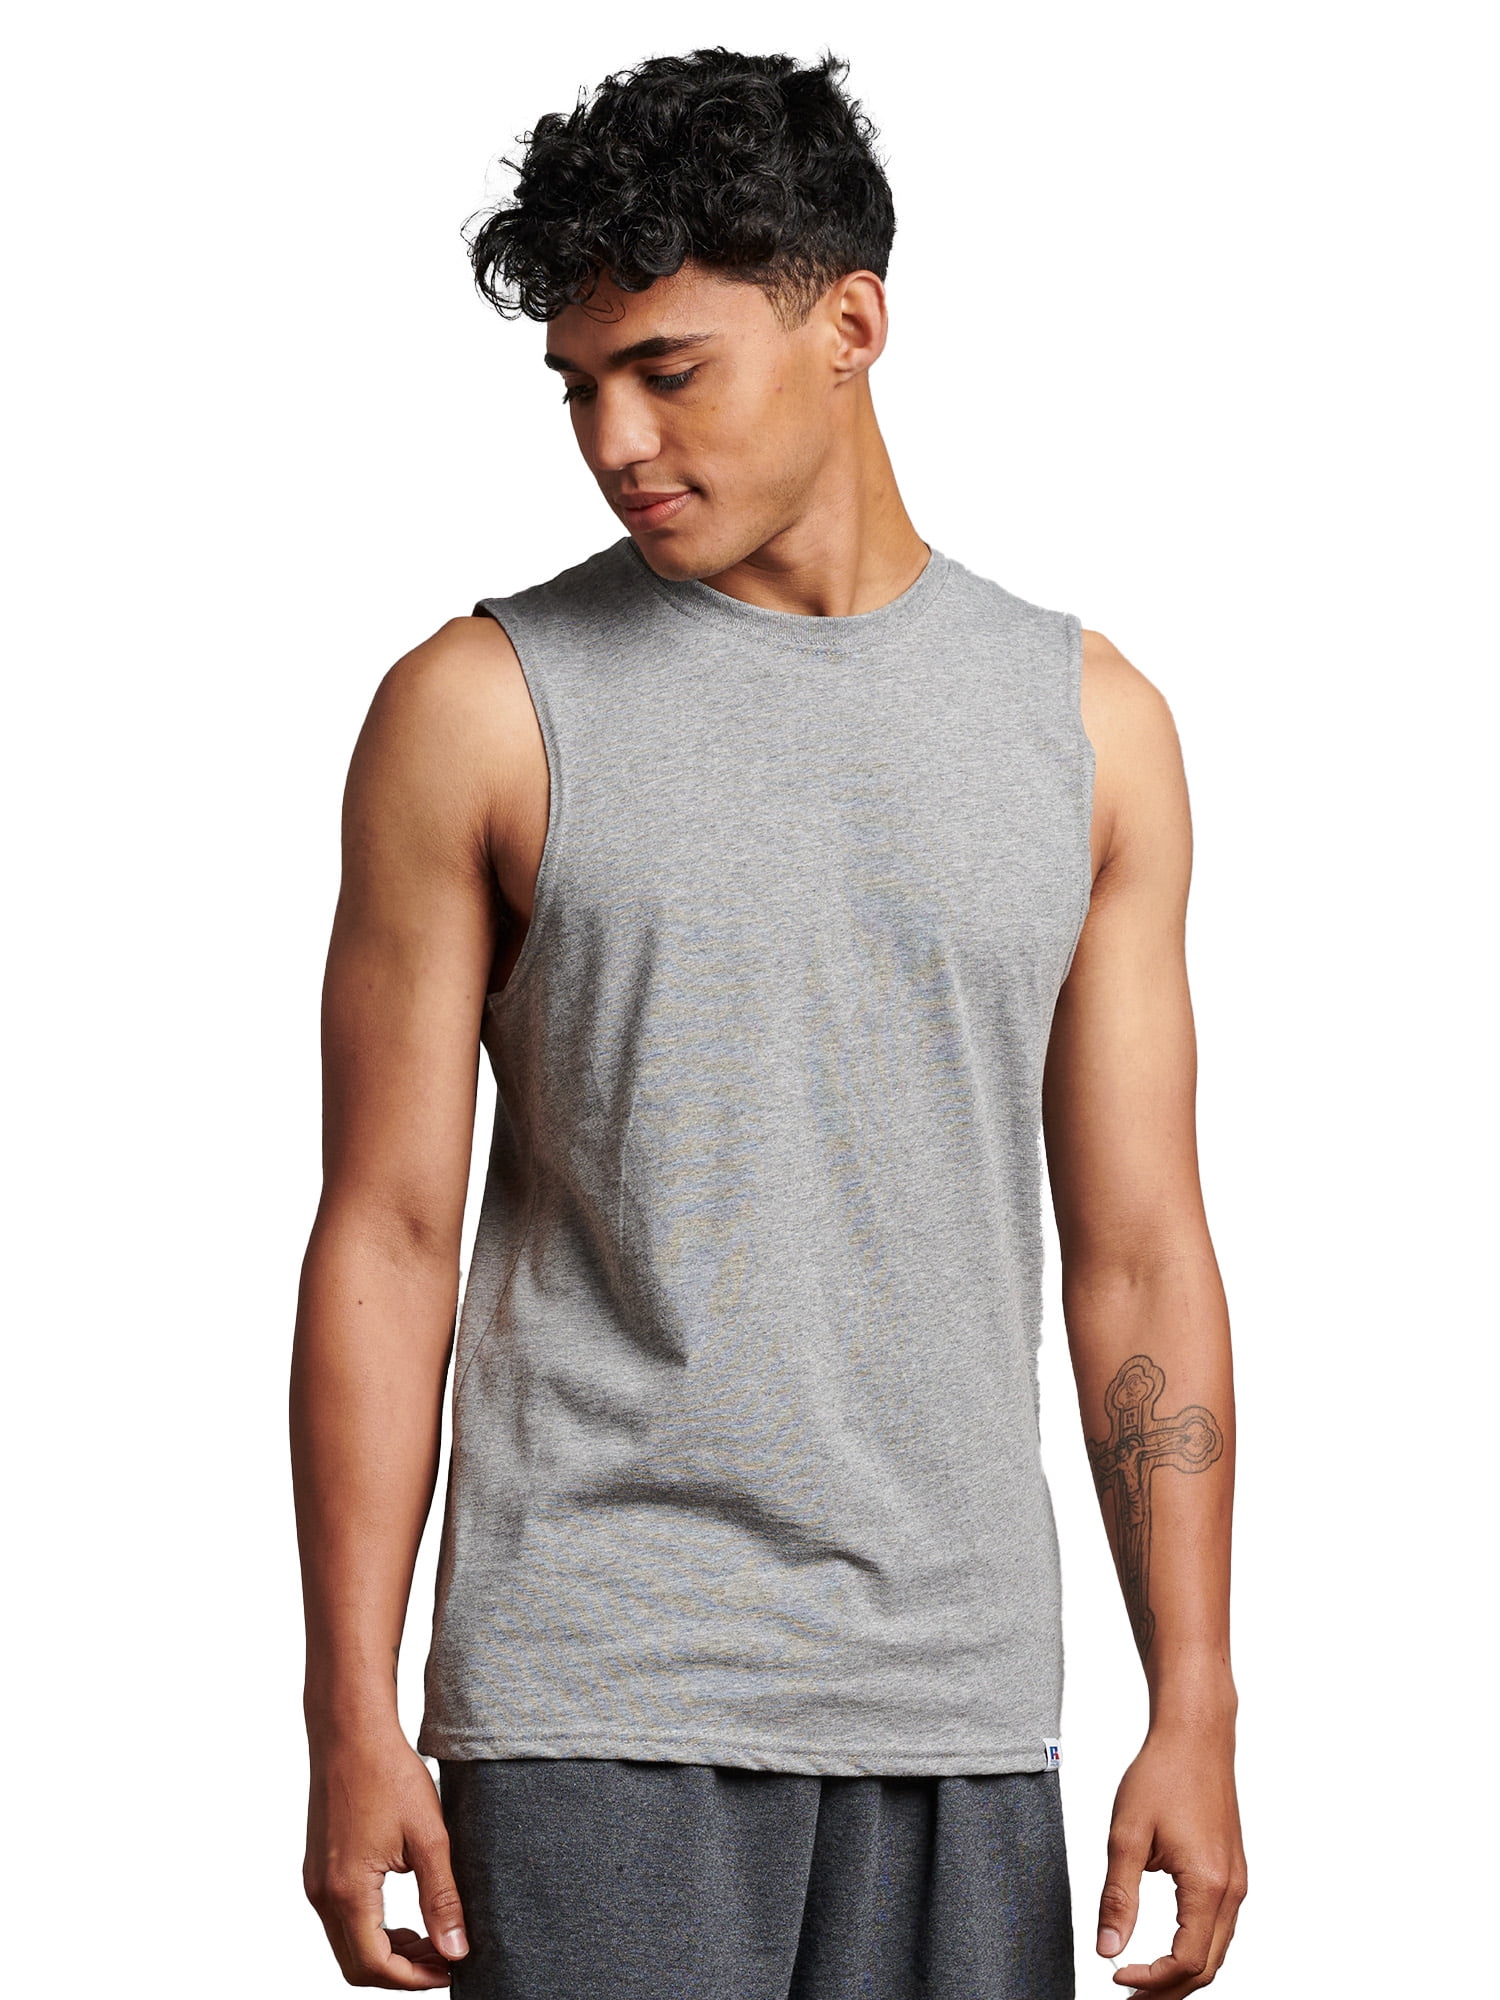 Russell Athletic Men's Cotton Performance Muscle Tank Top, Sizes S-3XL ...